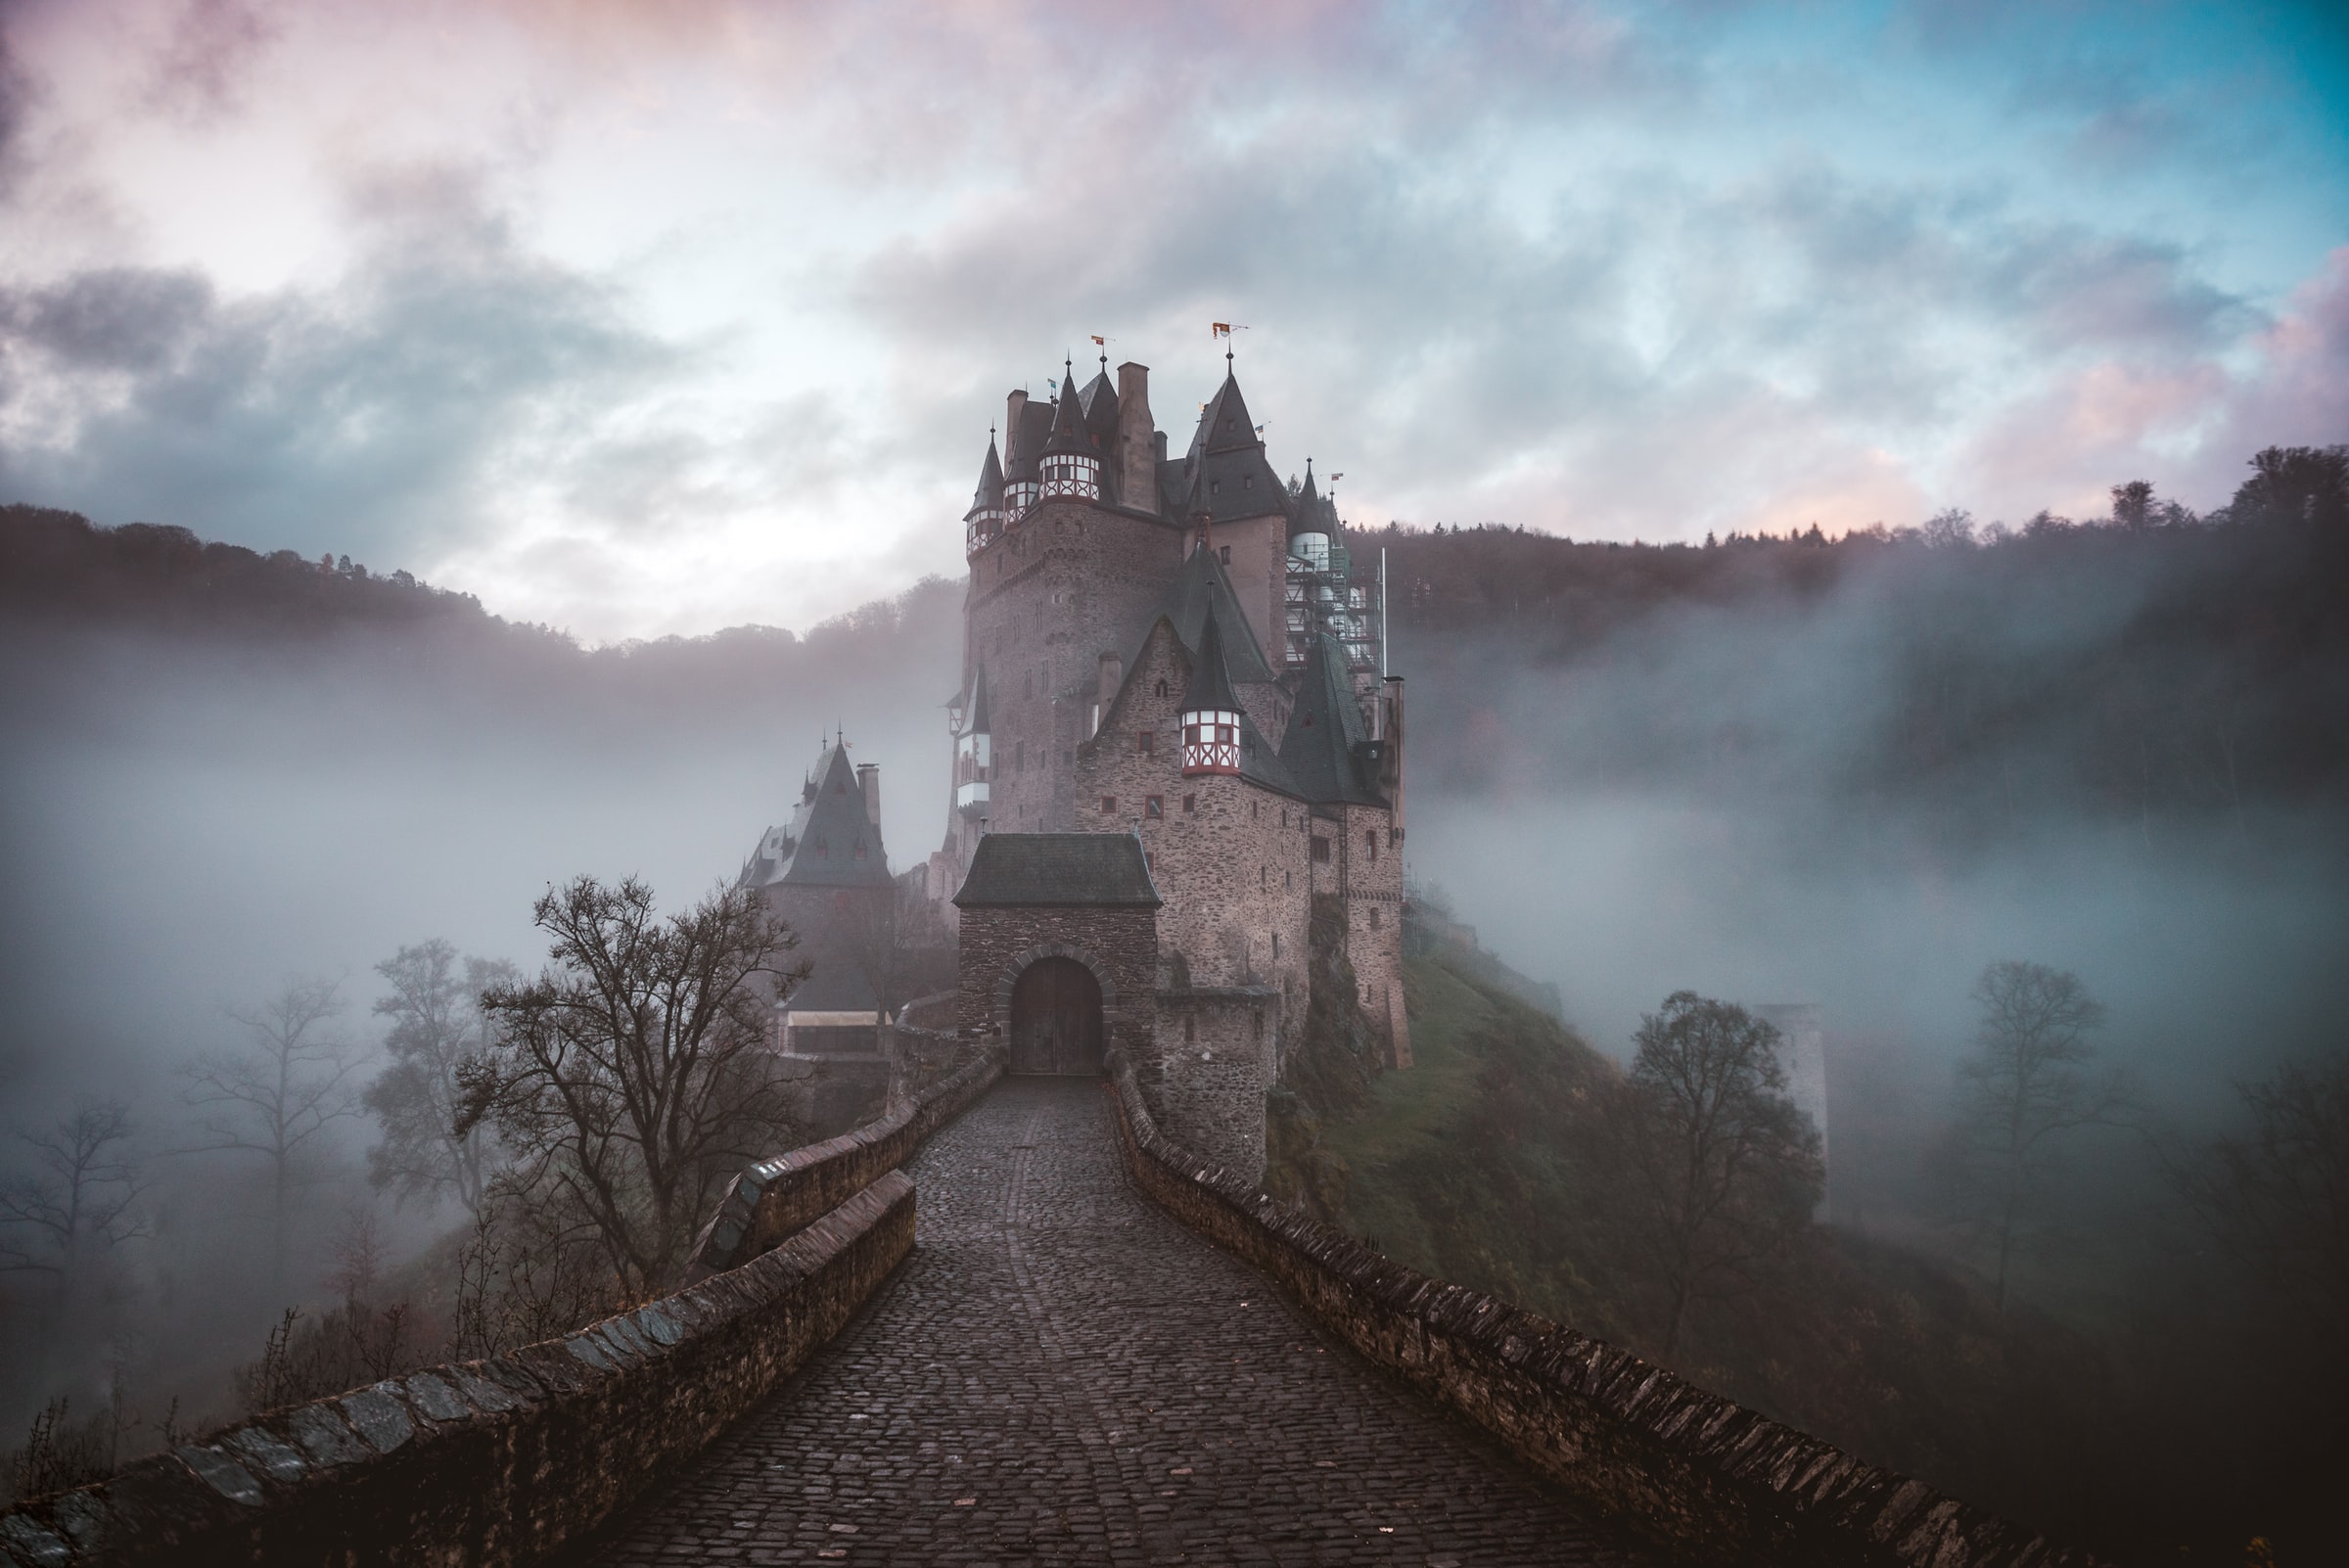 Castle with turrets in the fog